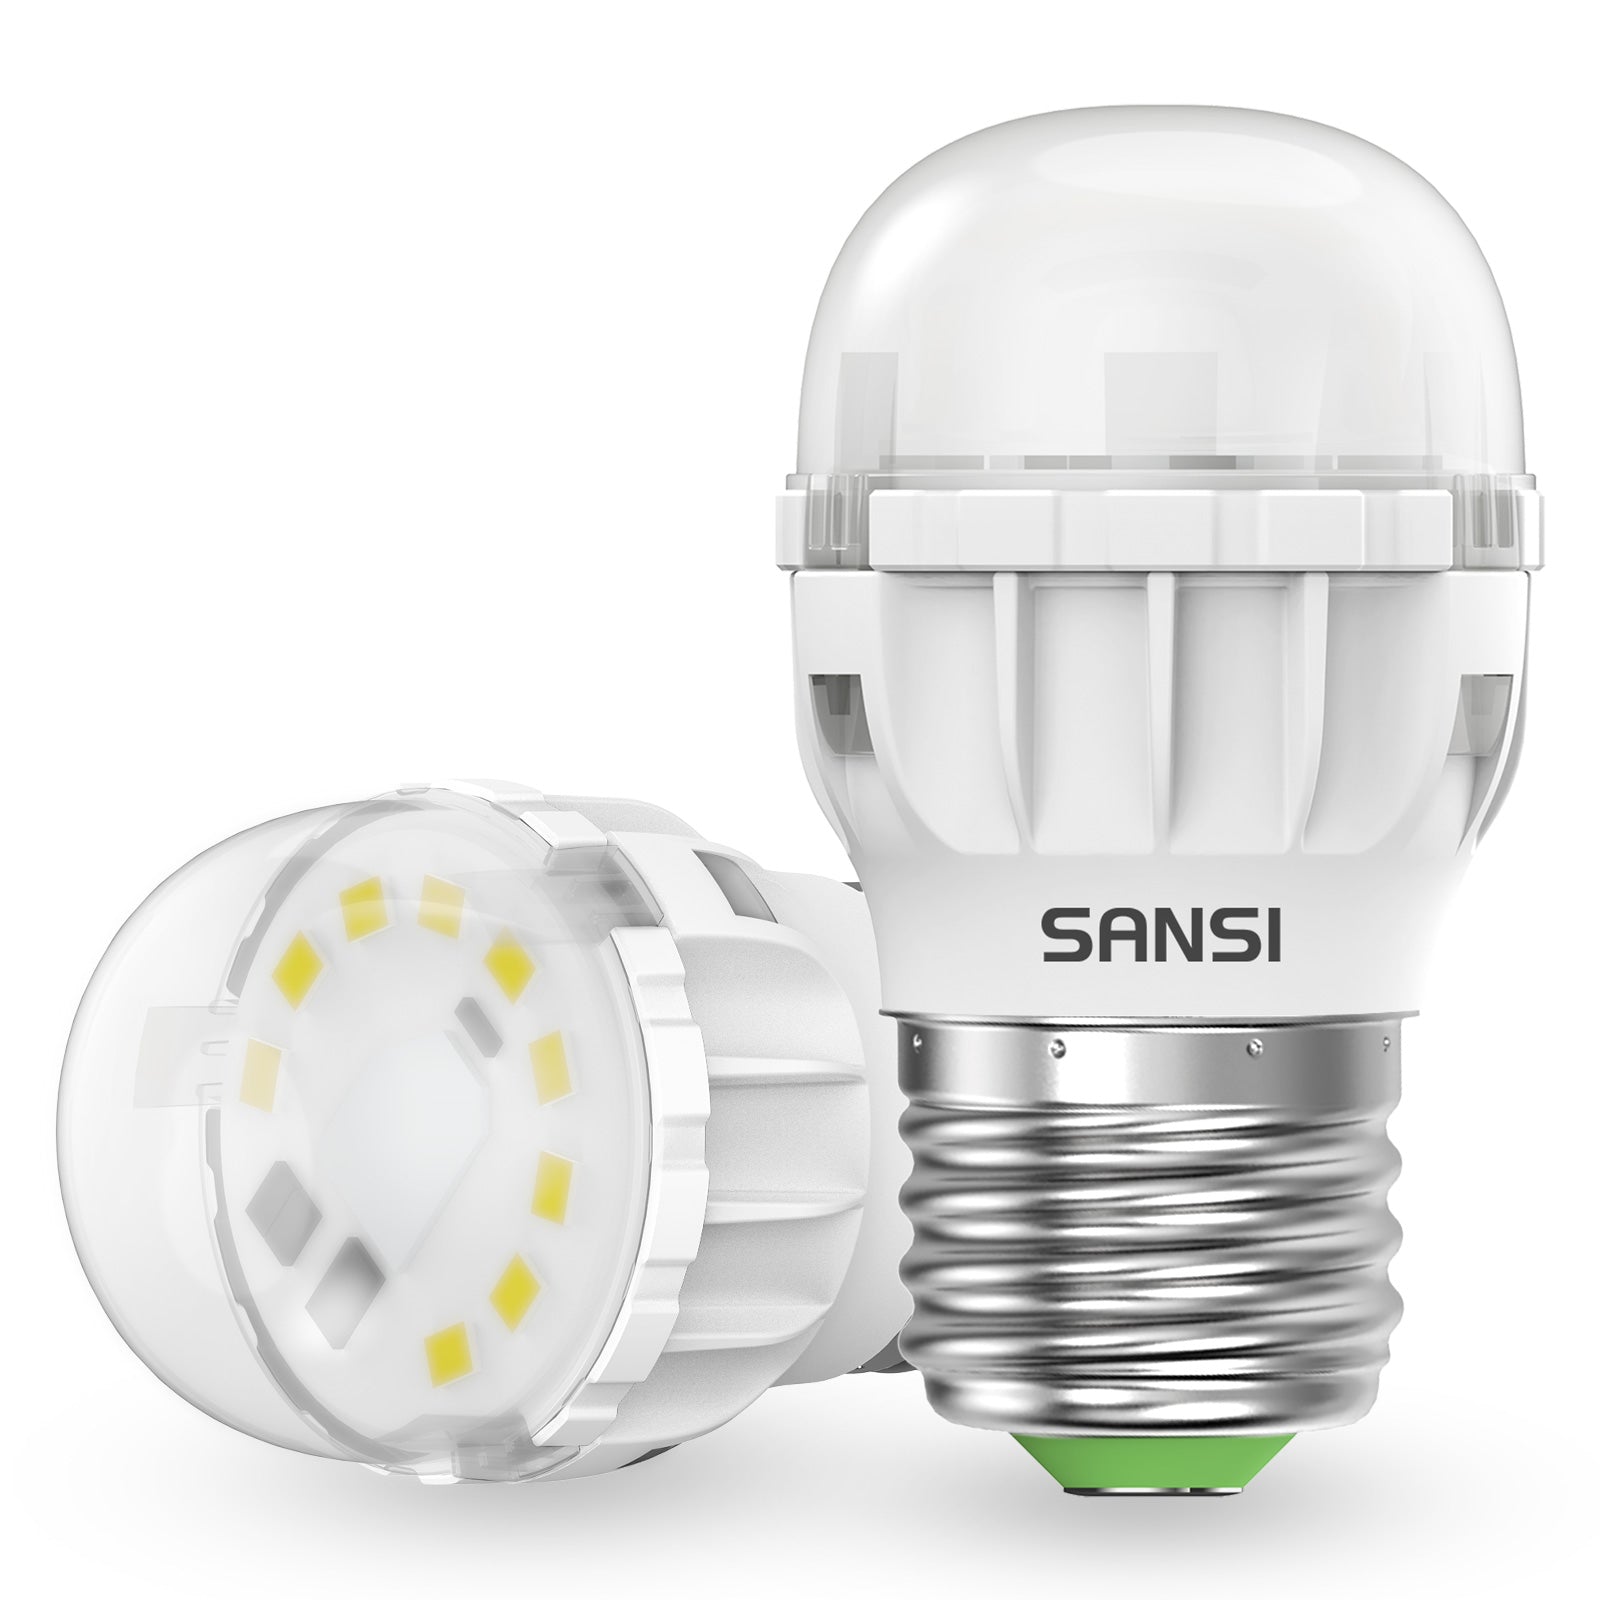 Bright and Efficient A11 4W LED Light Bulb for Your Home